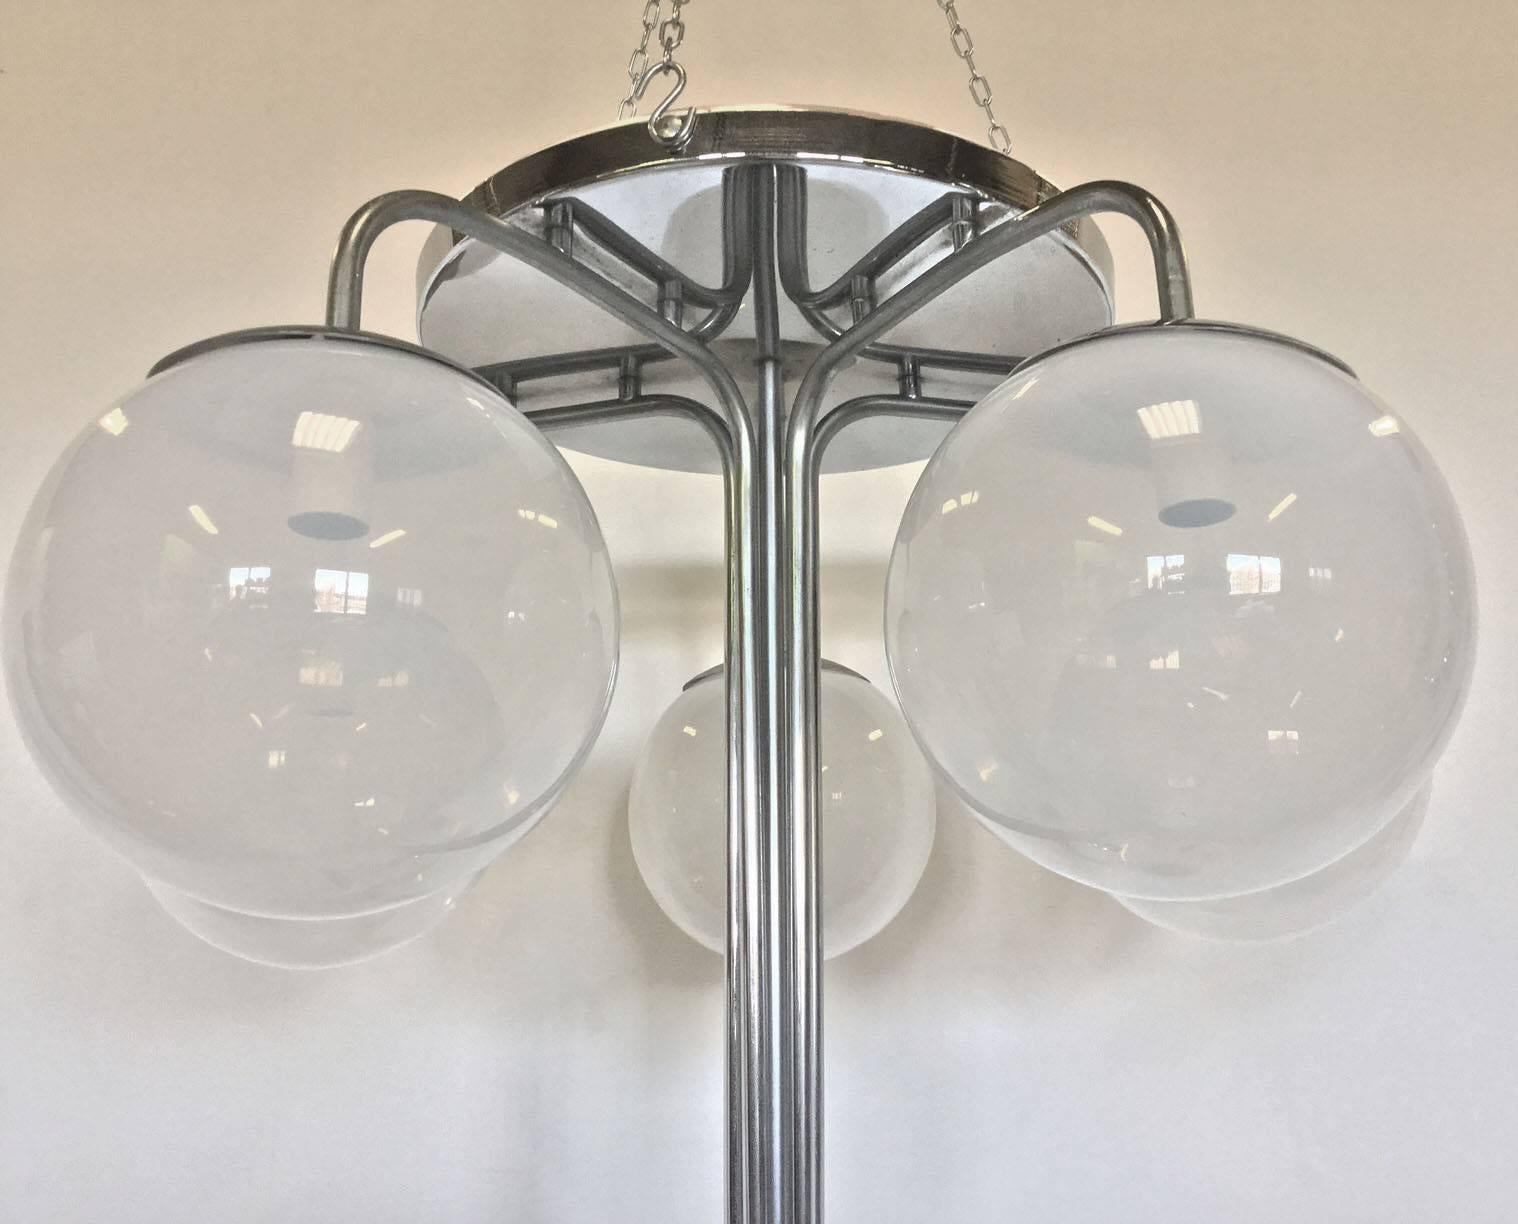 Rare original chandelier designed by A. Mangiarotti for Candle in the 1960s, as the historic catalogue of the company shows us. 
Chrome-plated brass frame with ten transparent shaded glass bowls as diffusers.
 